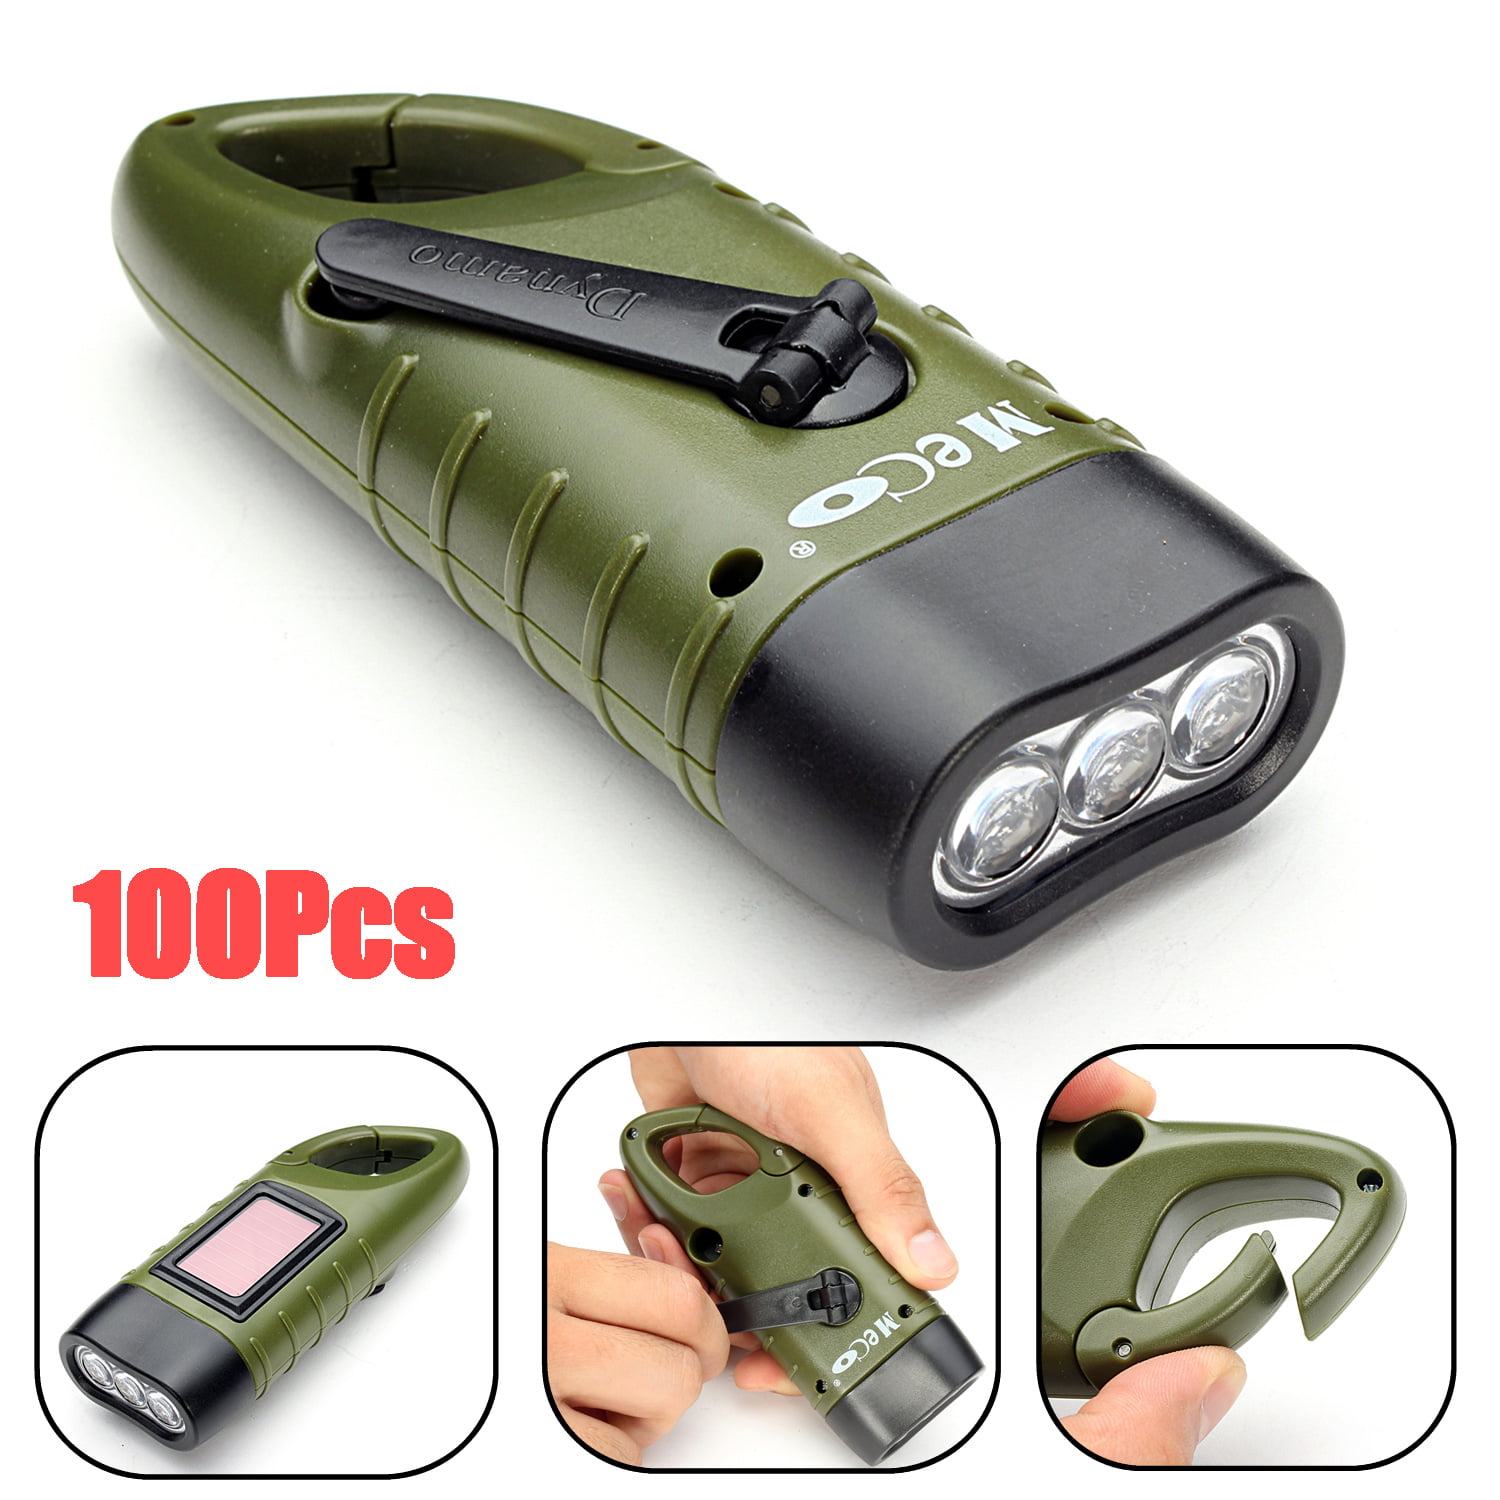 Solar Powered Hand Crank Flashlight For Emergency Hiking Camping and Survival Gear Rechargeable LED Cranking Light With Clip By Stalwart